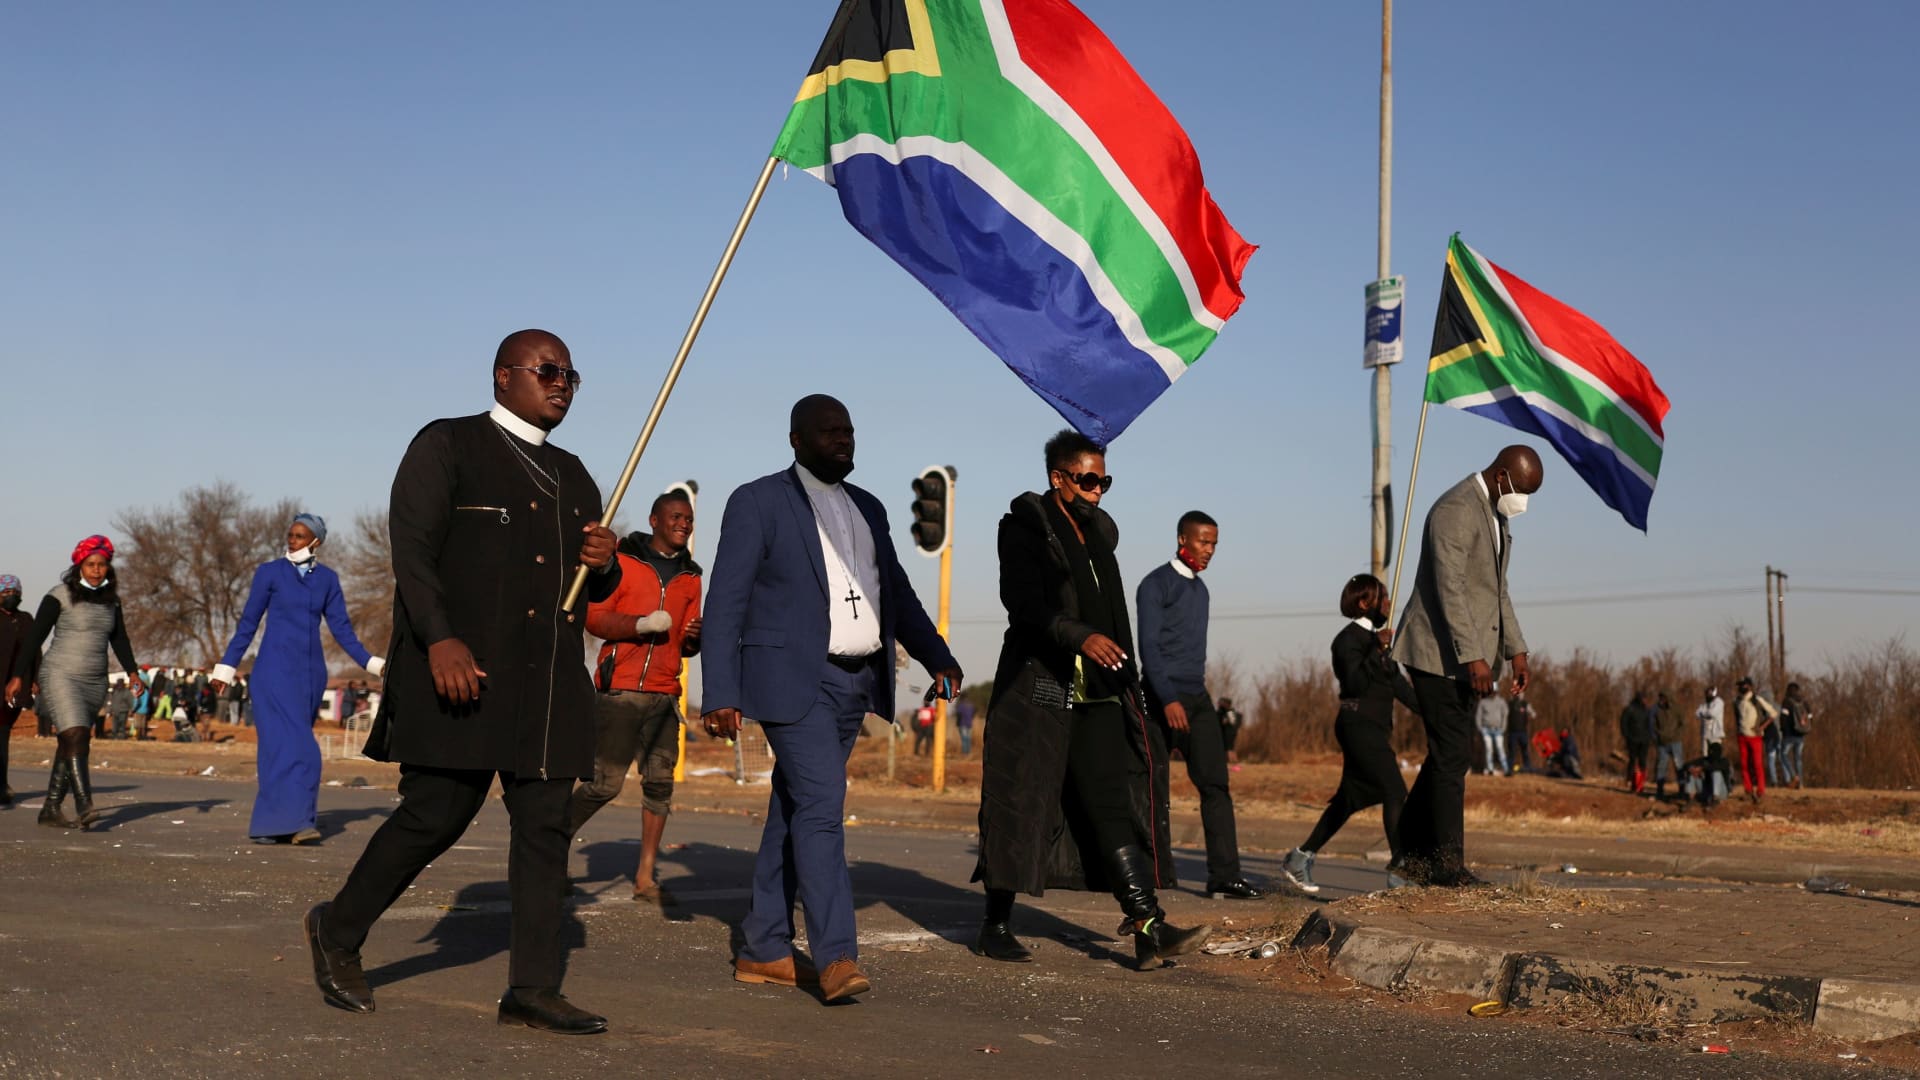 Religious leaders carrying South African flags walk near a looted shopping mall as the country deploys army to quell unrest linked to the jailing of former South African President Jacob Zuma, in Vosloorus, South Africa, July 14, 2021.